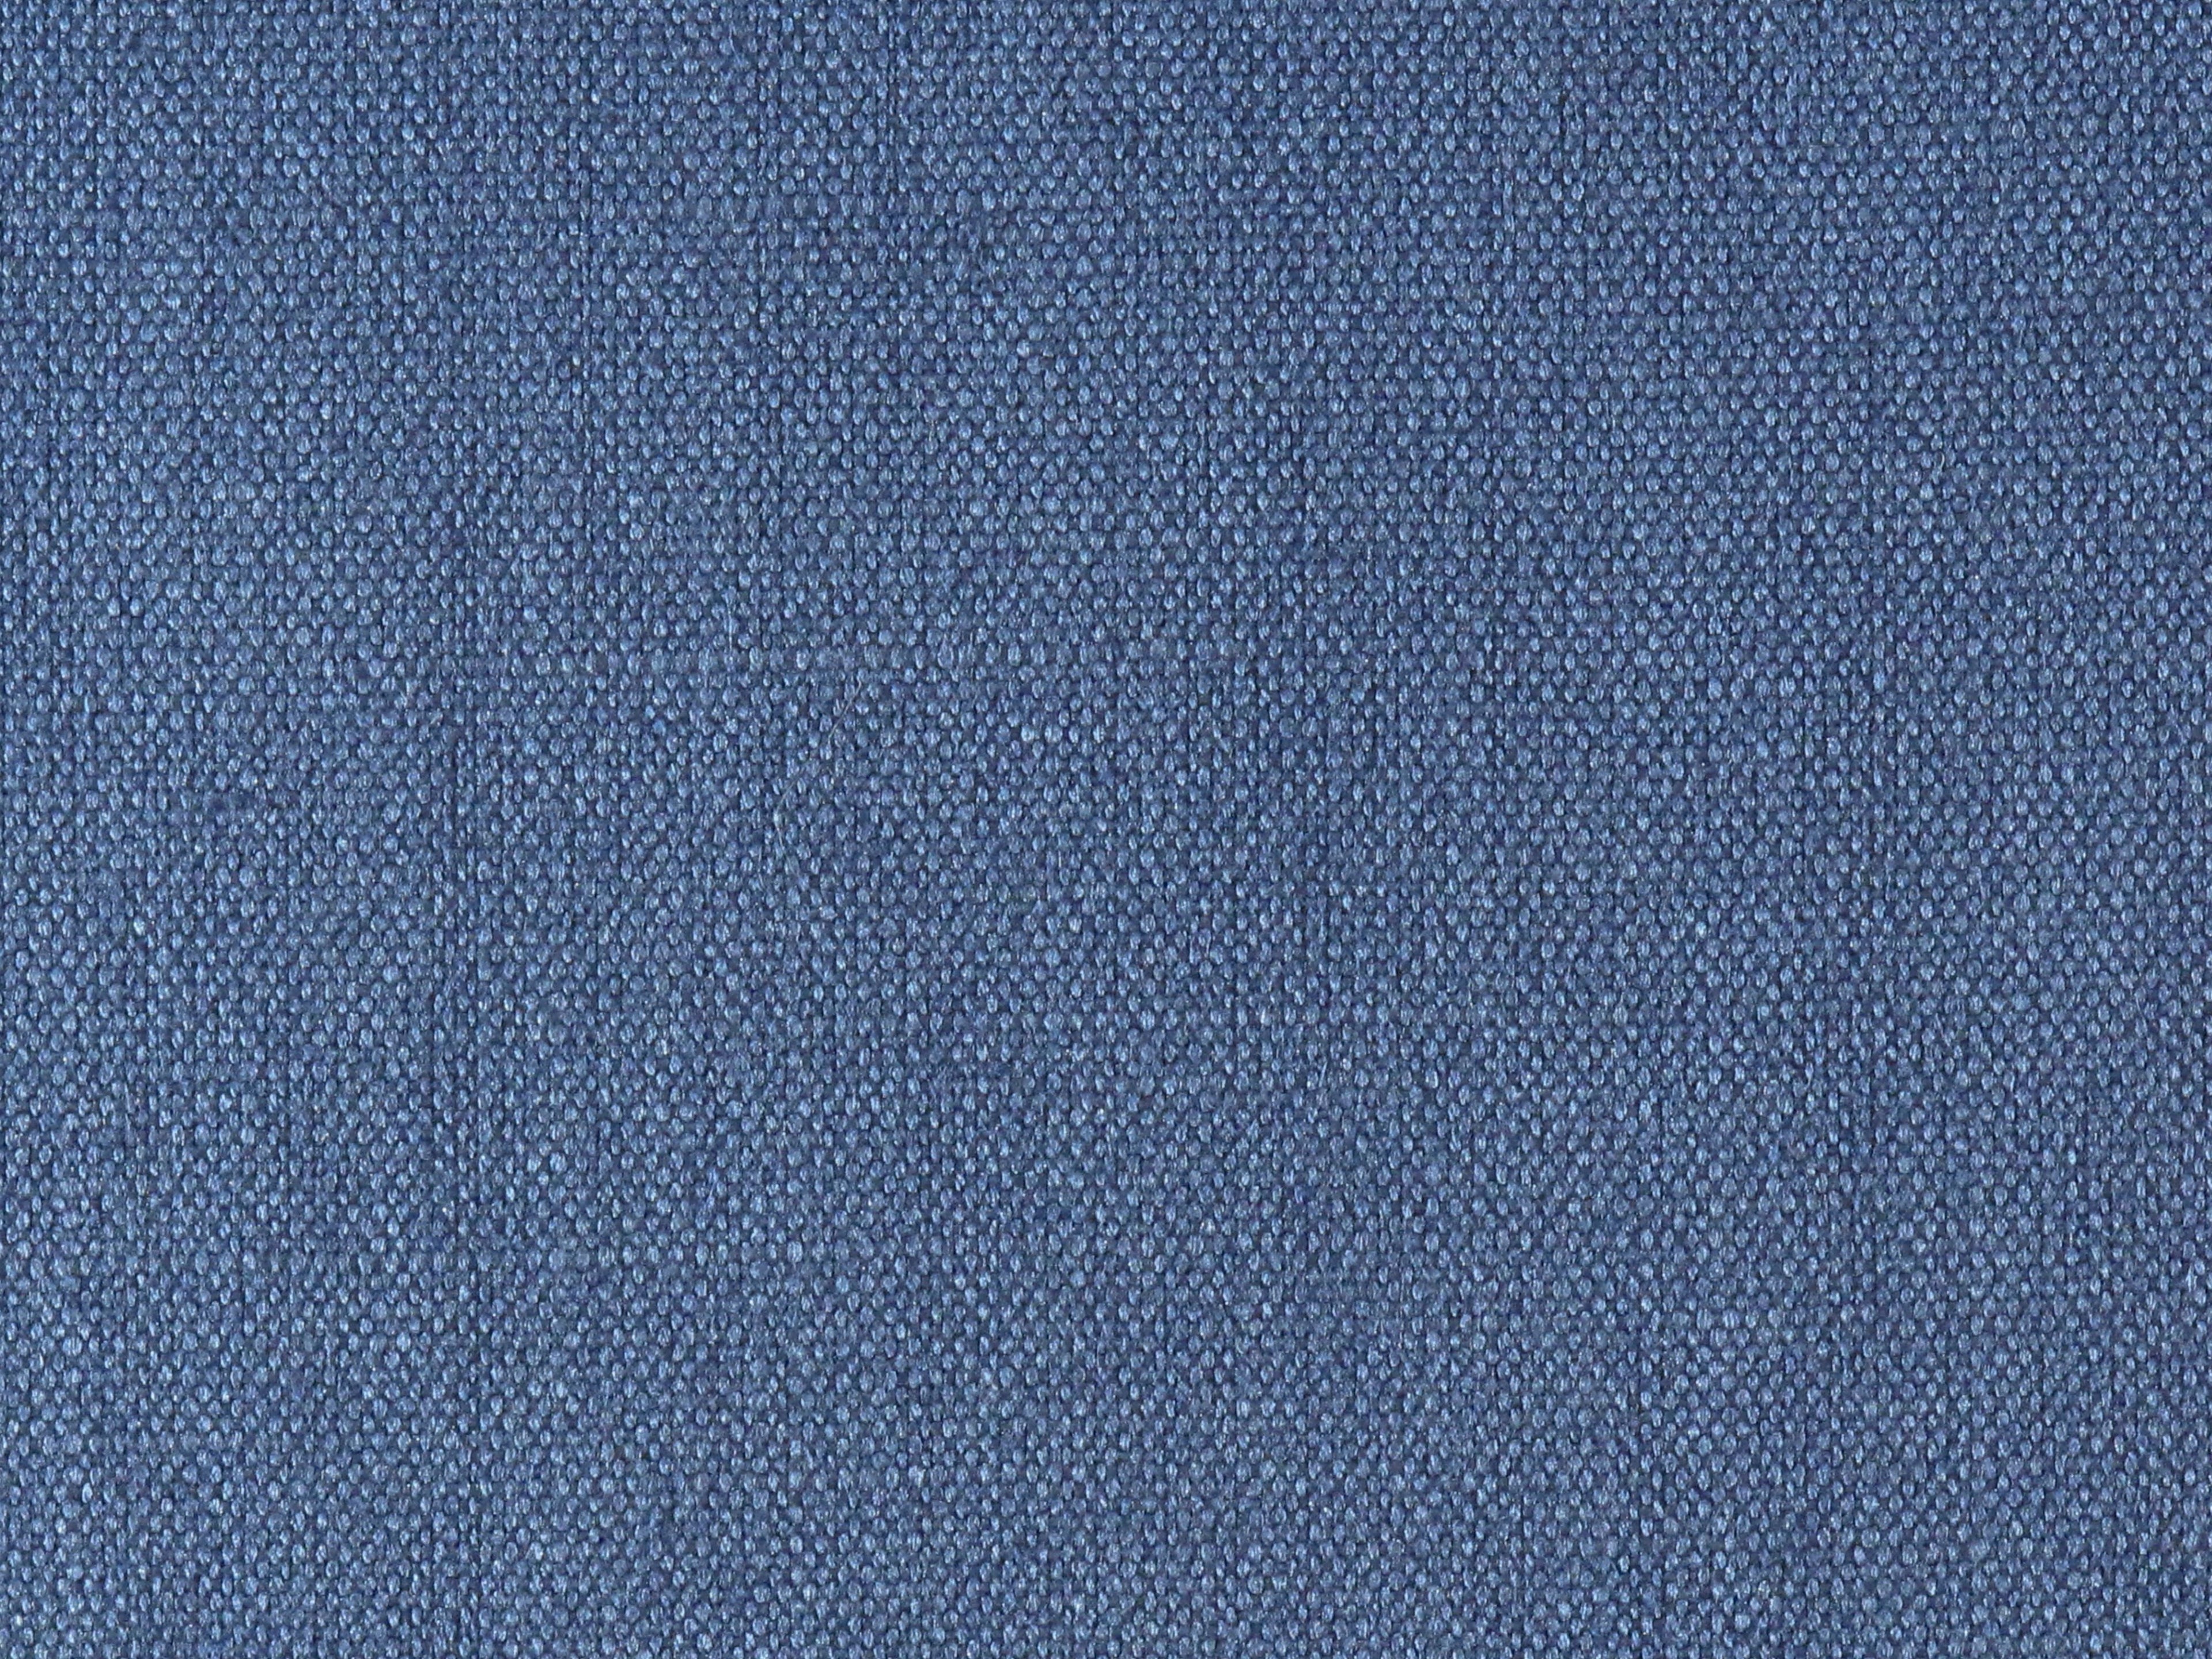 Lakeside Linen fabric in denim color - pattern number PK 0006LAKE - by Scalamandre in the Old World Weavers collection